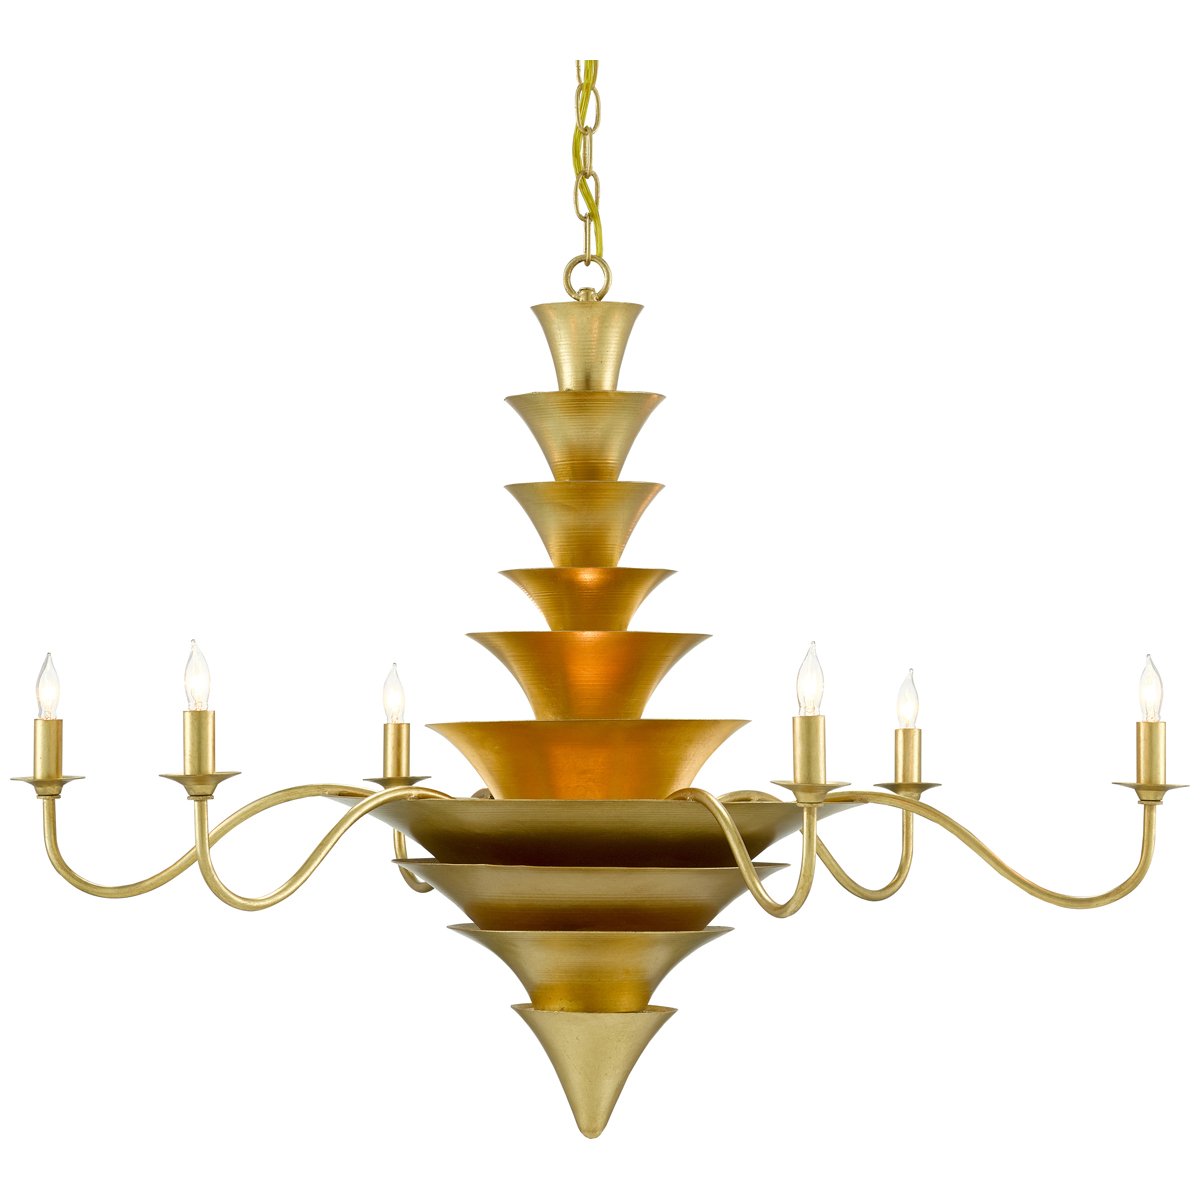 Currey and Company Sillage Chandelier